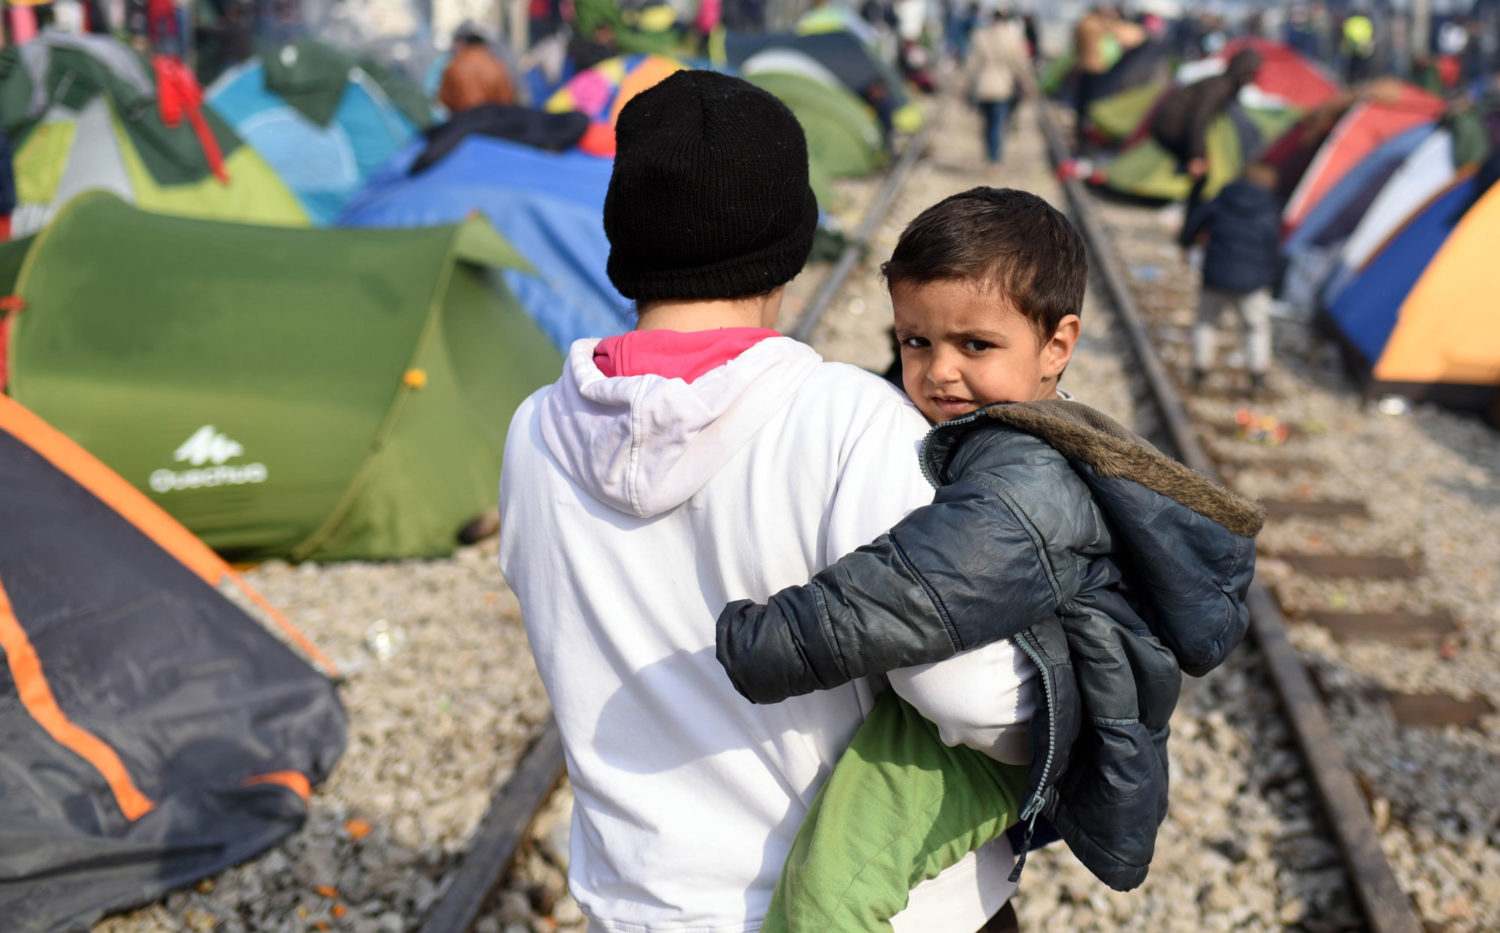 A young boy is carried by a family member walking between makeshift tents along the train tracks in Idomeni, Greece. Unicef/2016/Georgiev